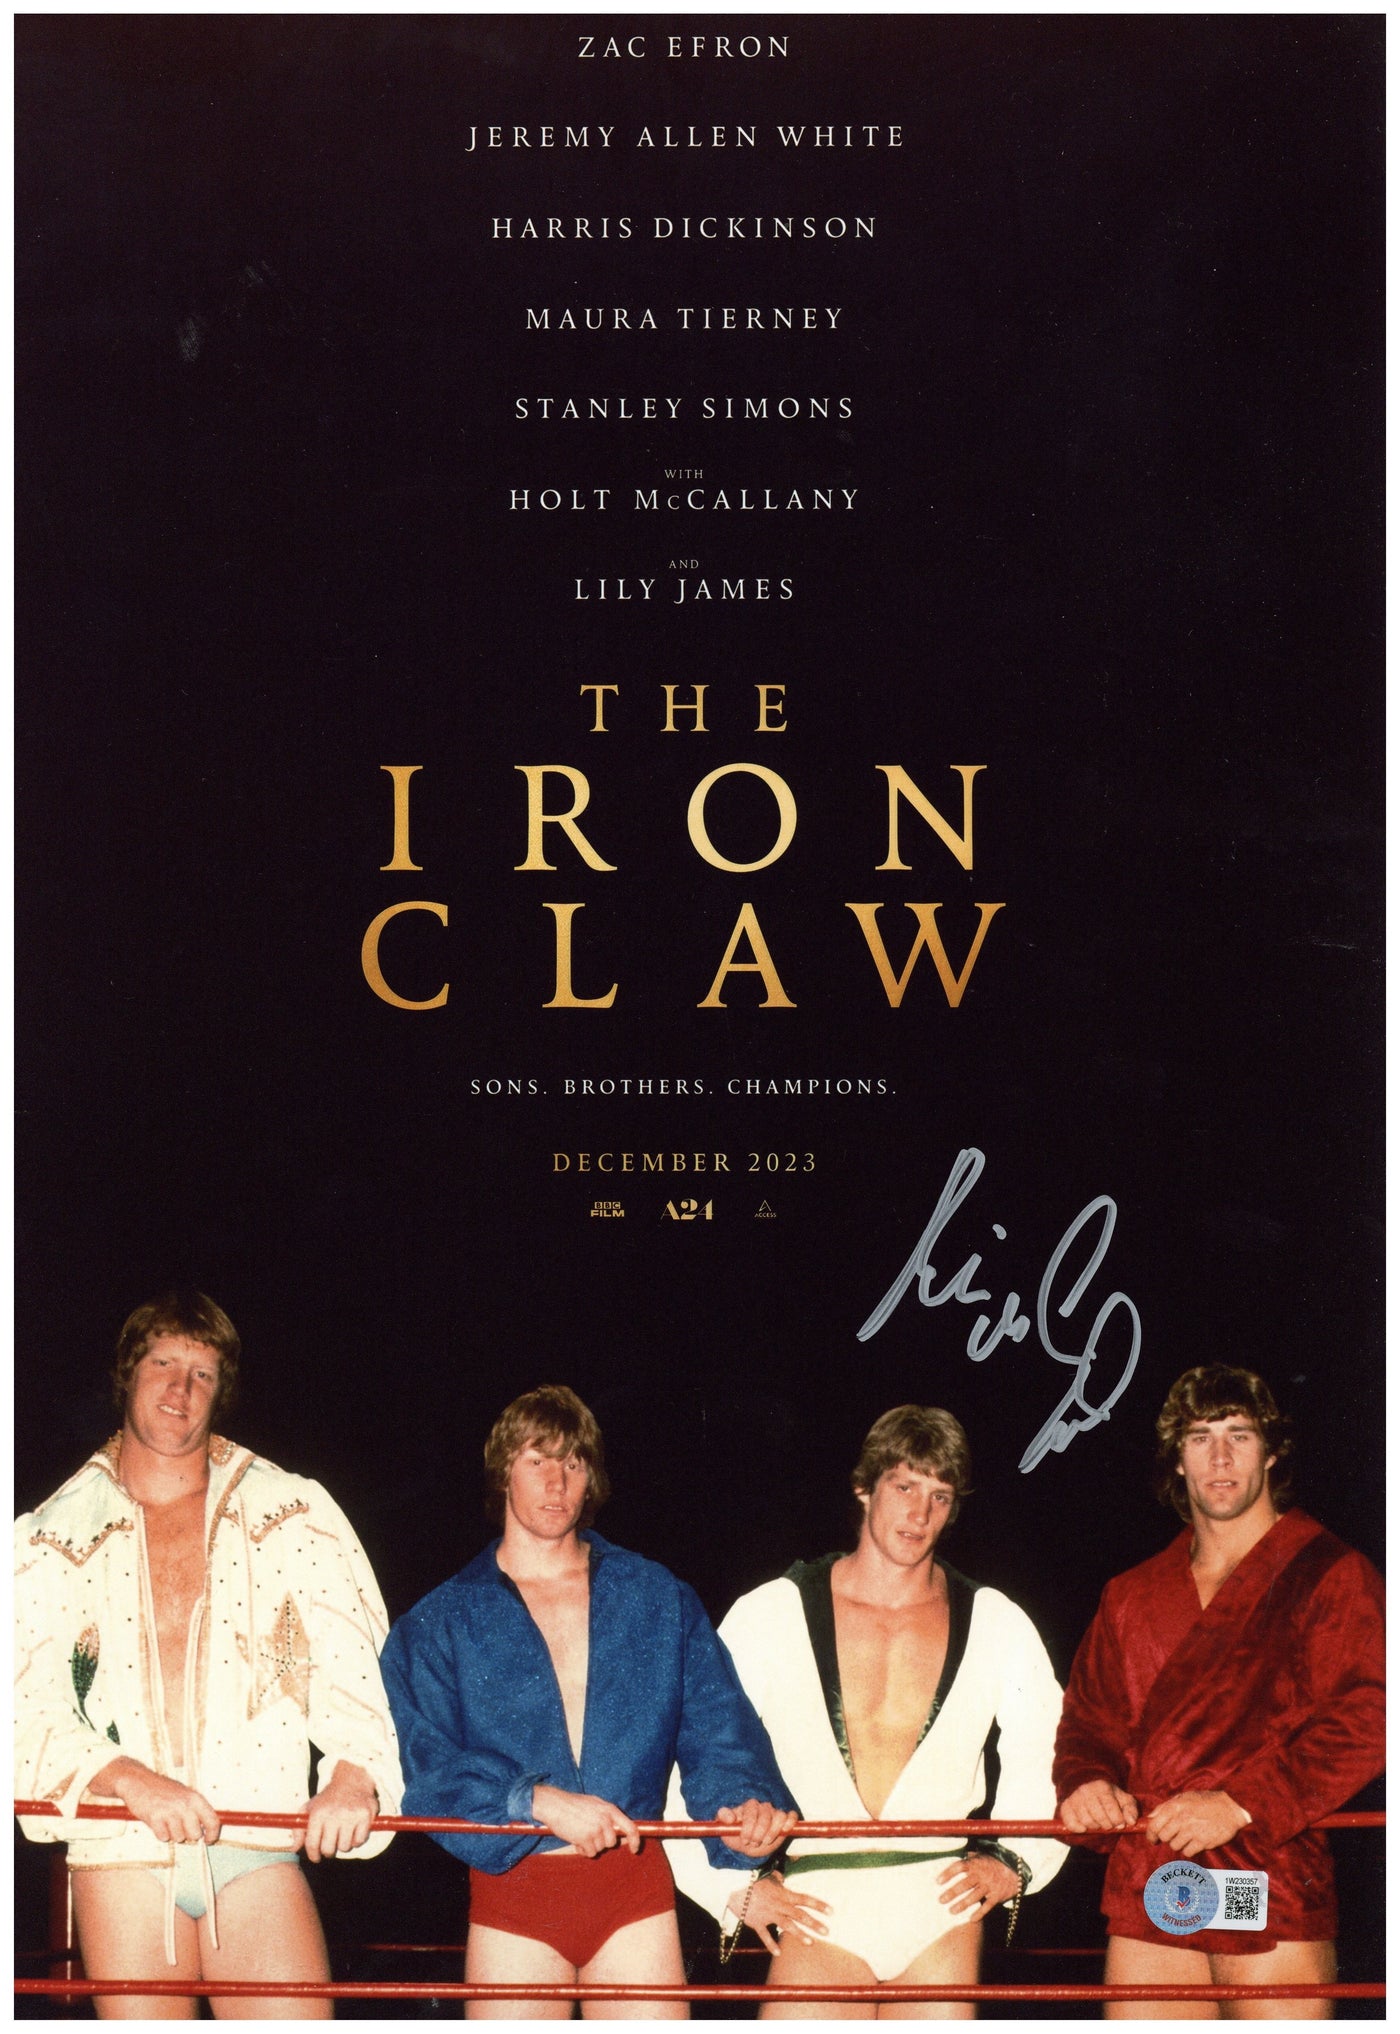 Kevin Von Erich Signed 12x18 Photo Iron Claw Autographed BAS COA #2